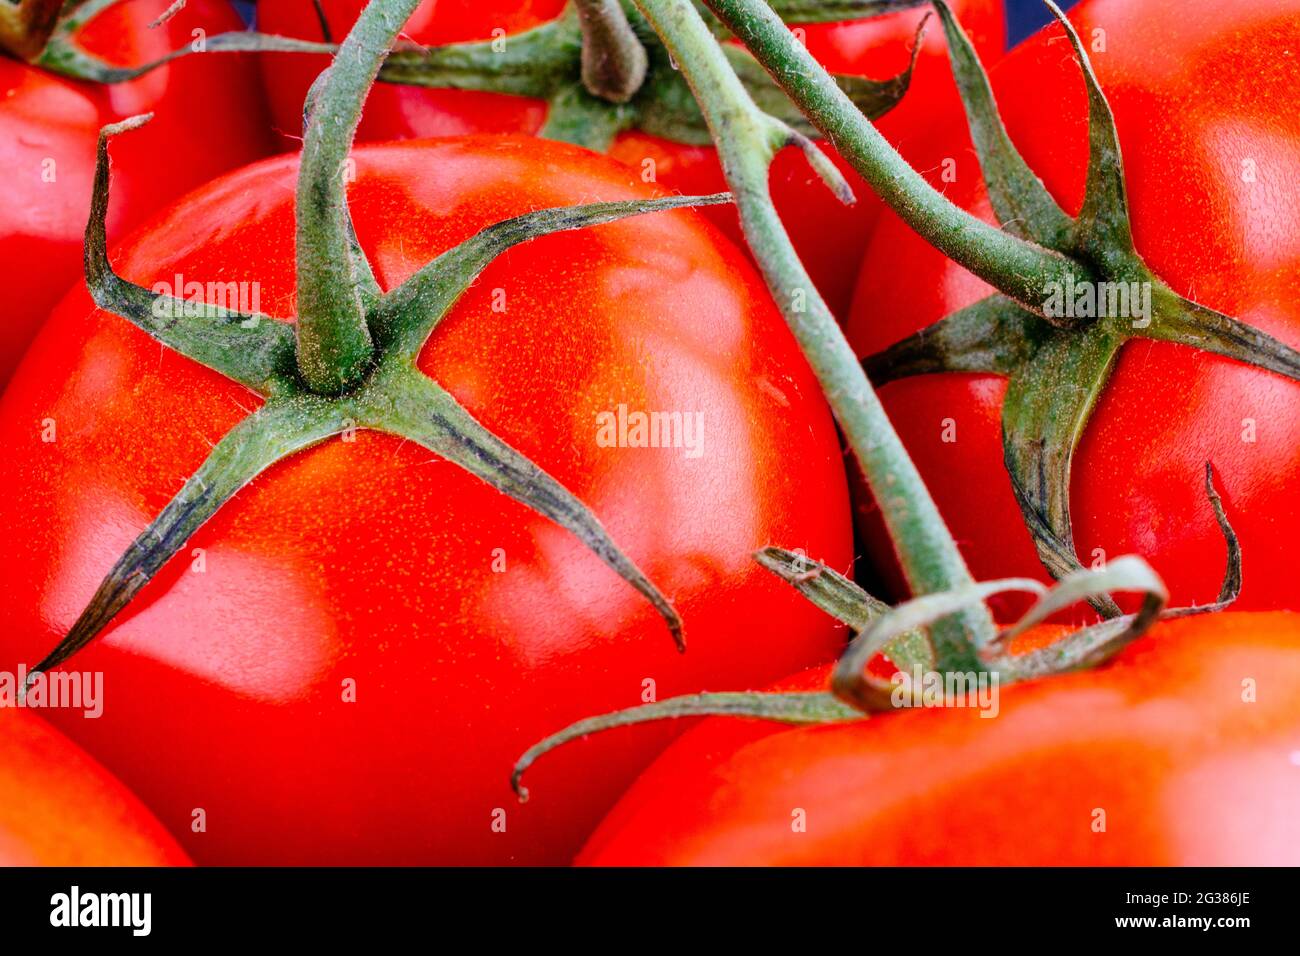 Red Tomato with Stem. The tomato is the edible berry of the plant Solanum lycopersicum, commonly known as a tomato plant. Andalucia, Spain, Europe Stock Photo